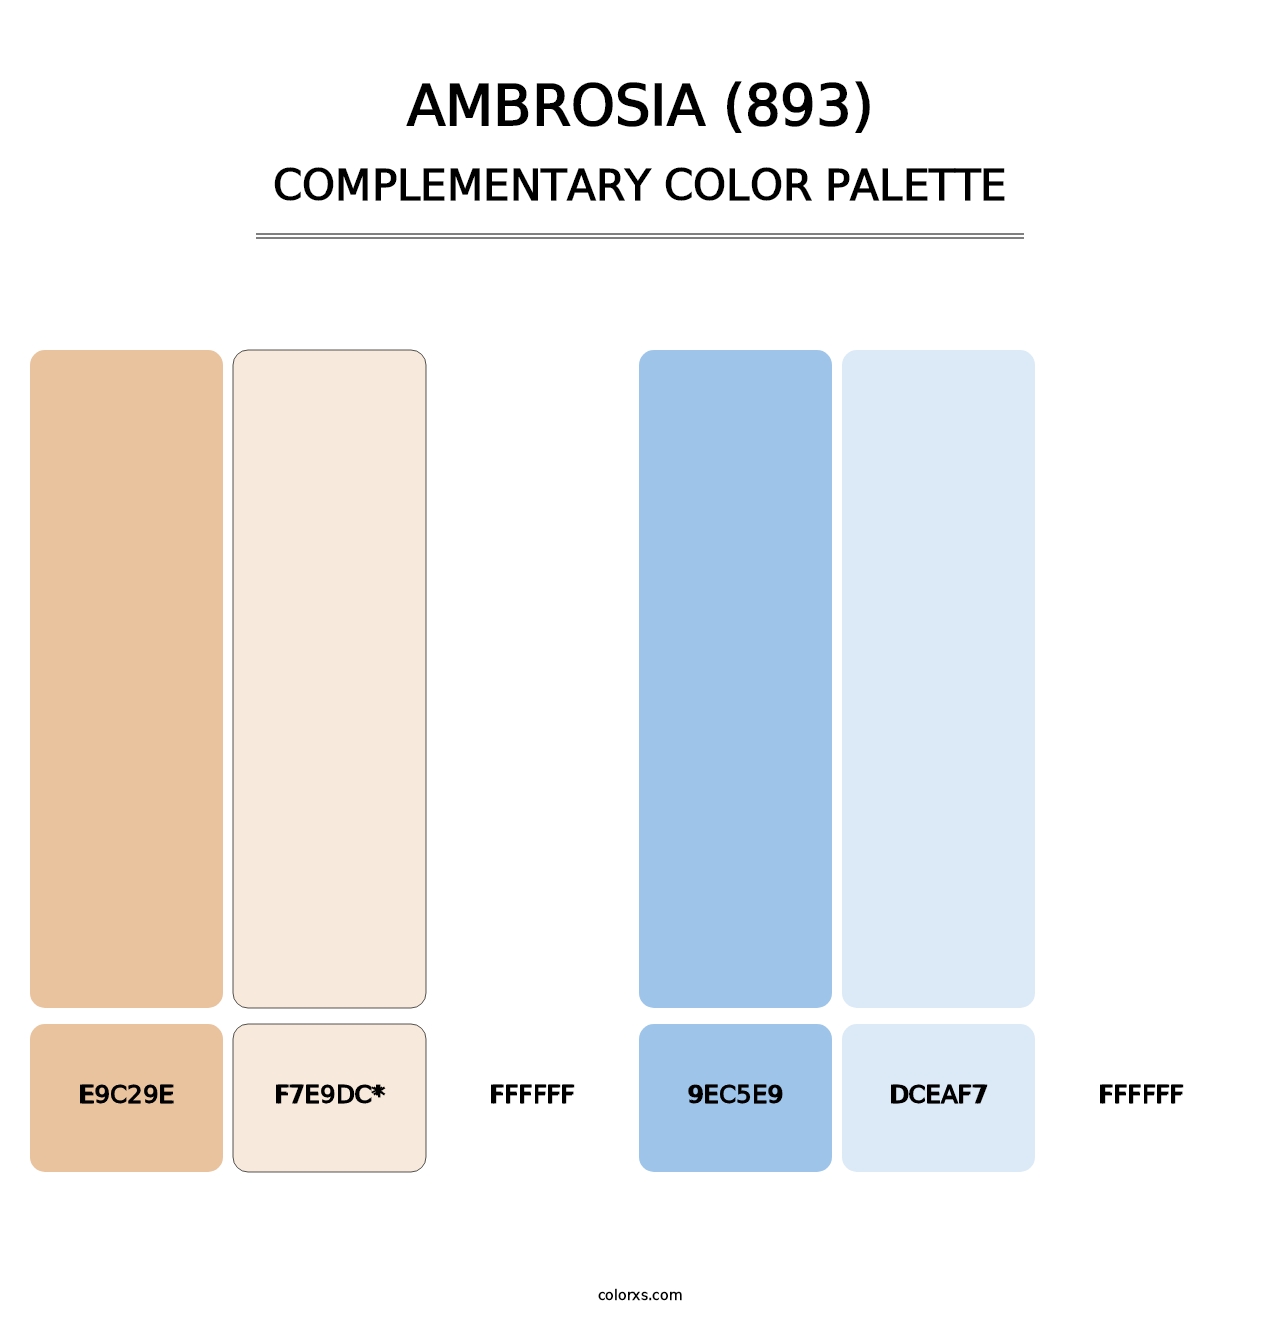 Ambrosia (893) - Complementary Color Palette